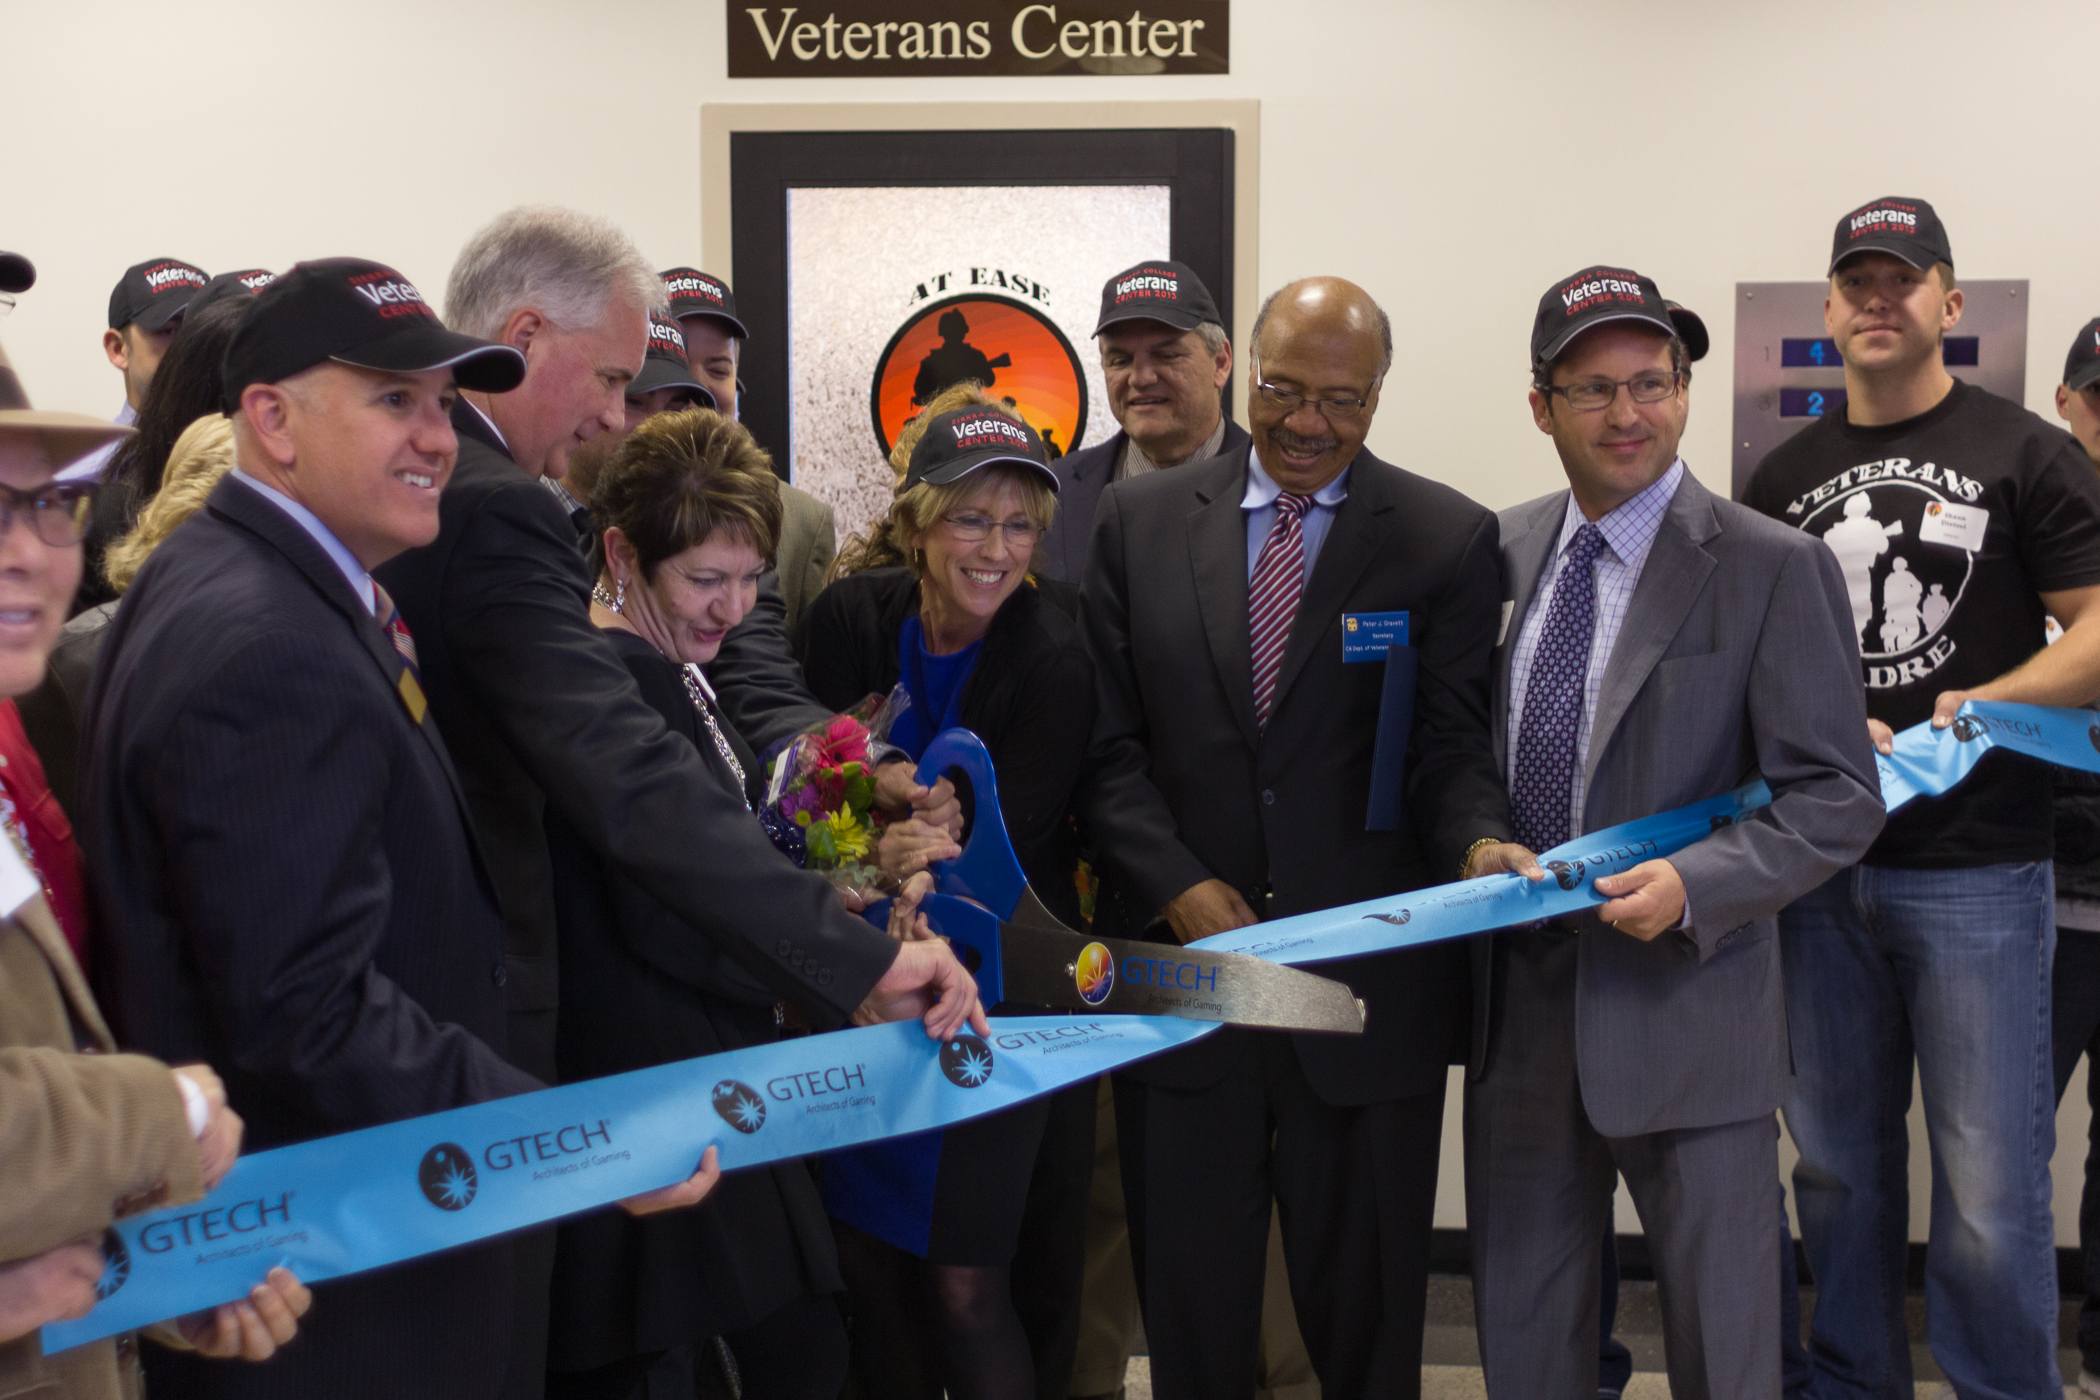 Ribbon cutting ceremony for the new Veterans Center at Sierra College